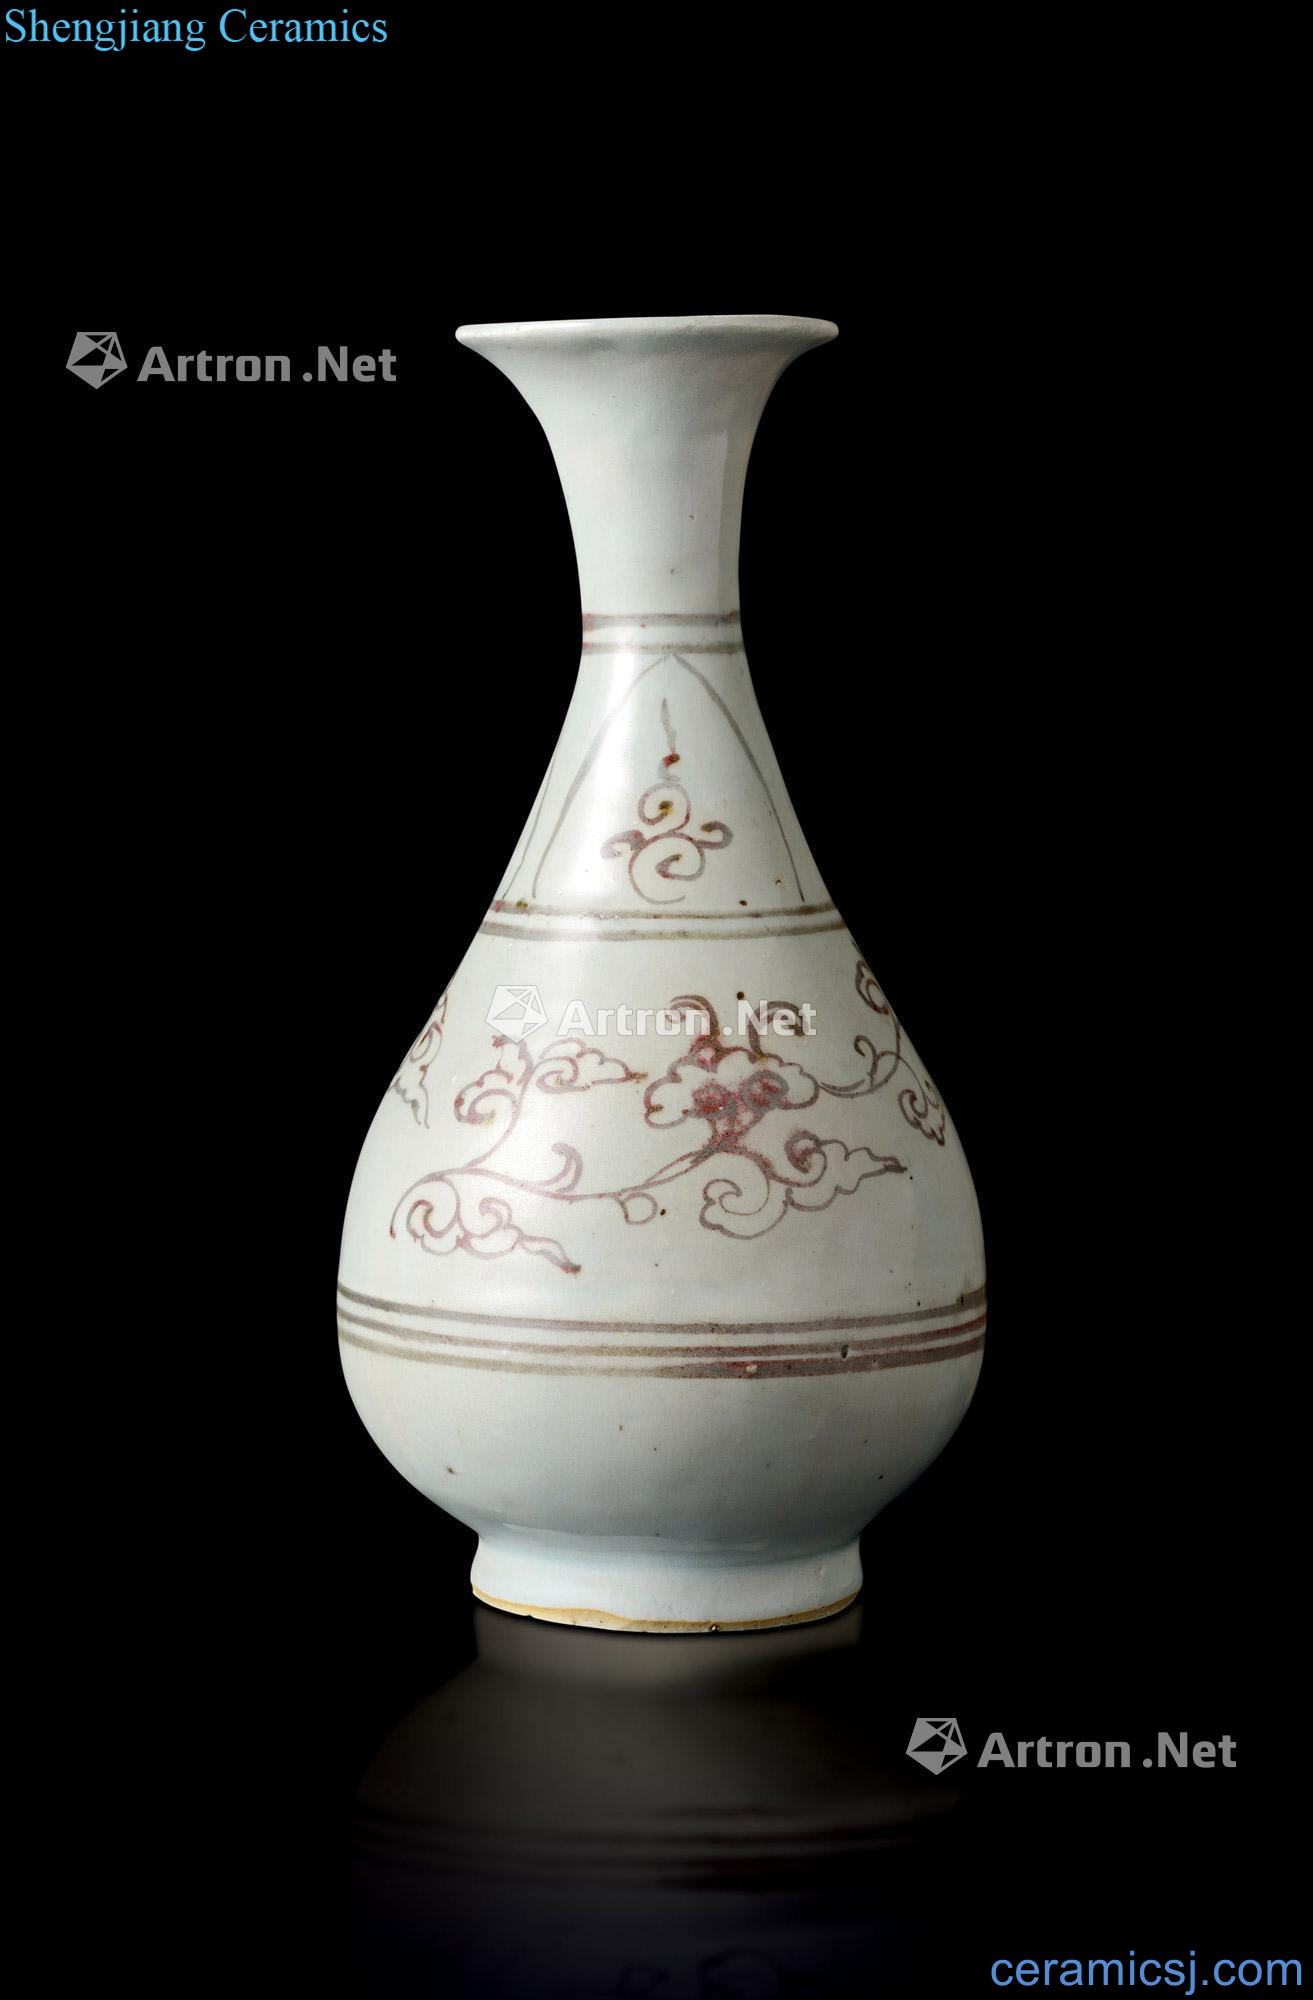 China, the yuan dynasty Flower grain okho spring bottle youligong tangled branches